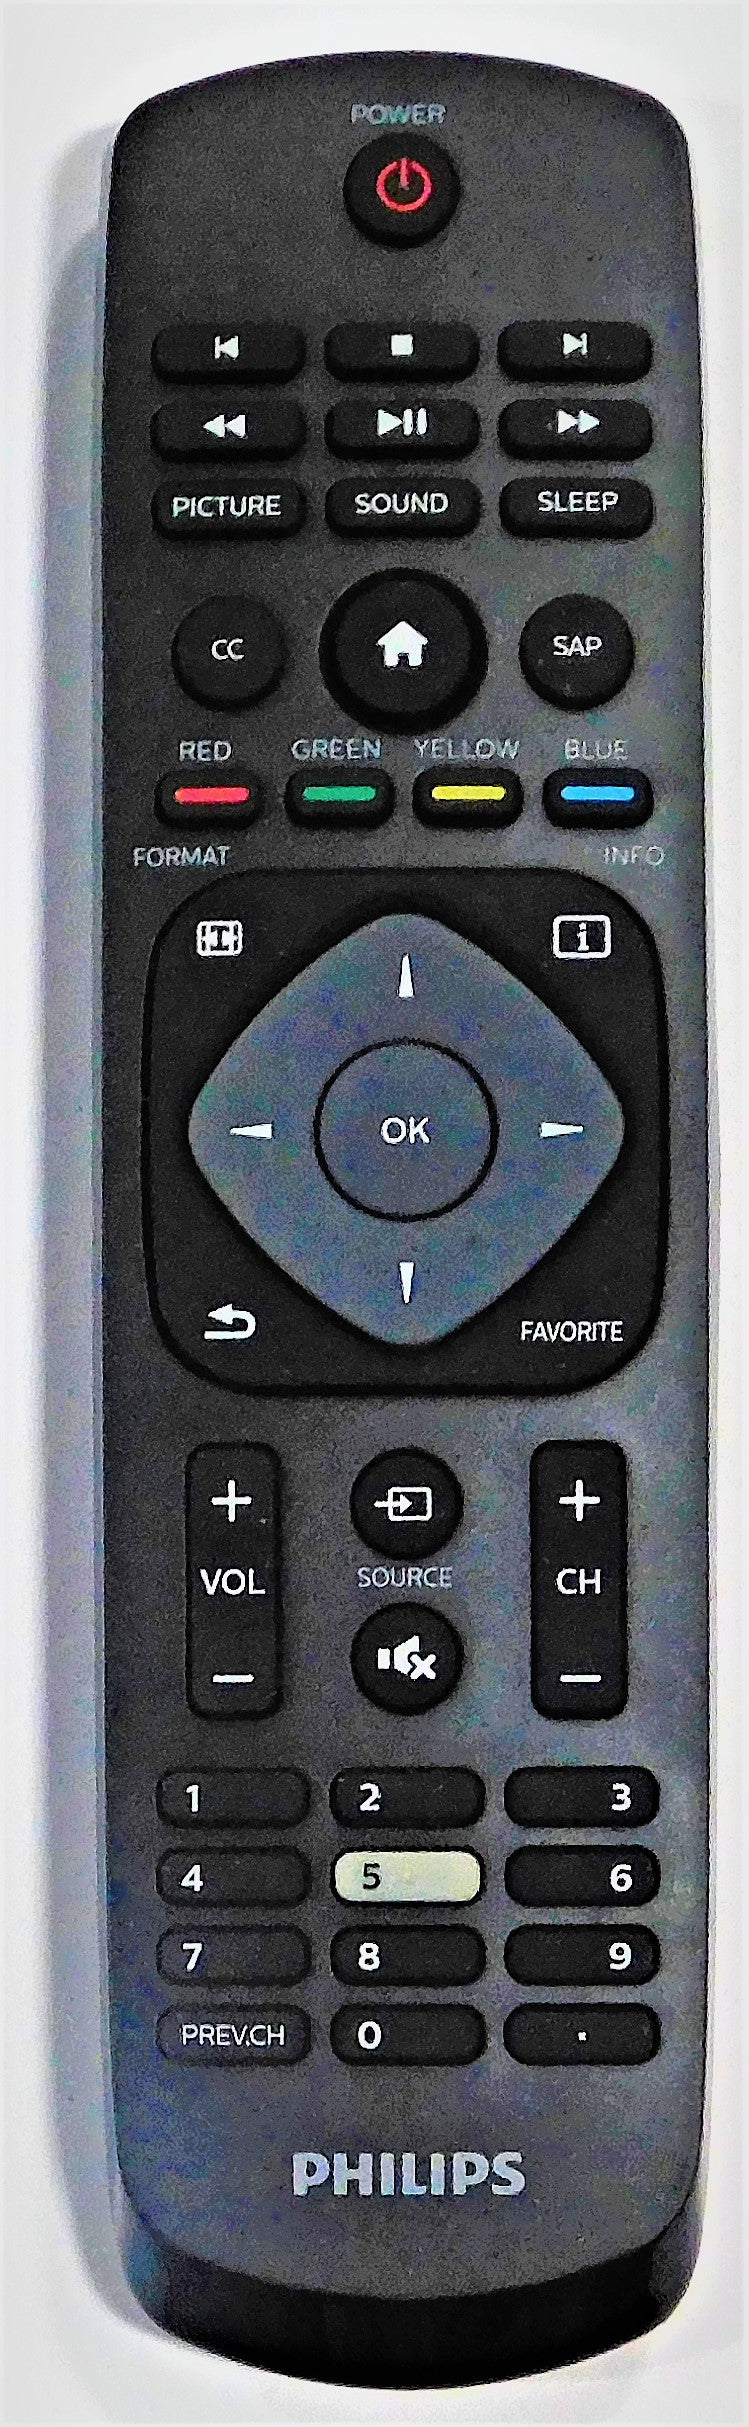 OEM replacement remote control for Philips LCD TVs 341920000321004